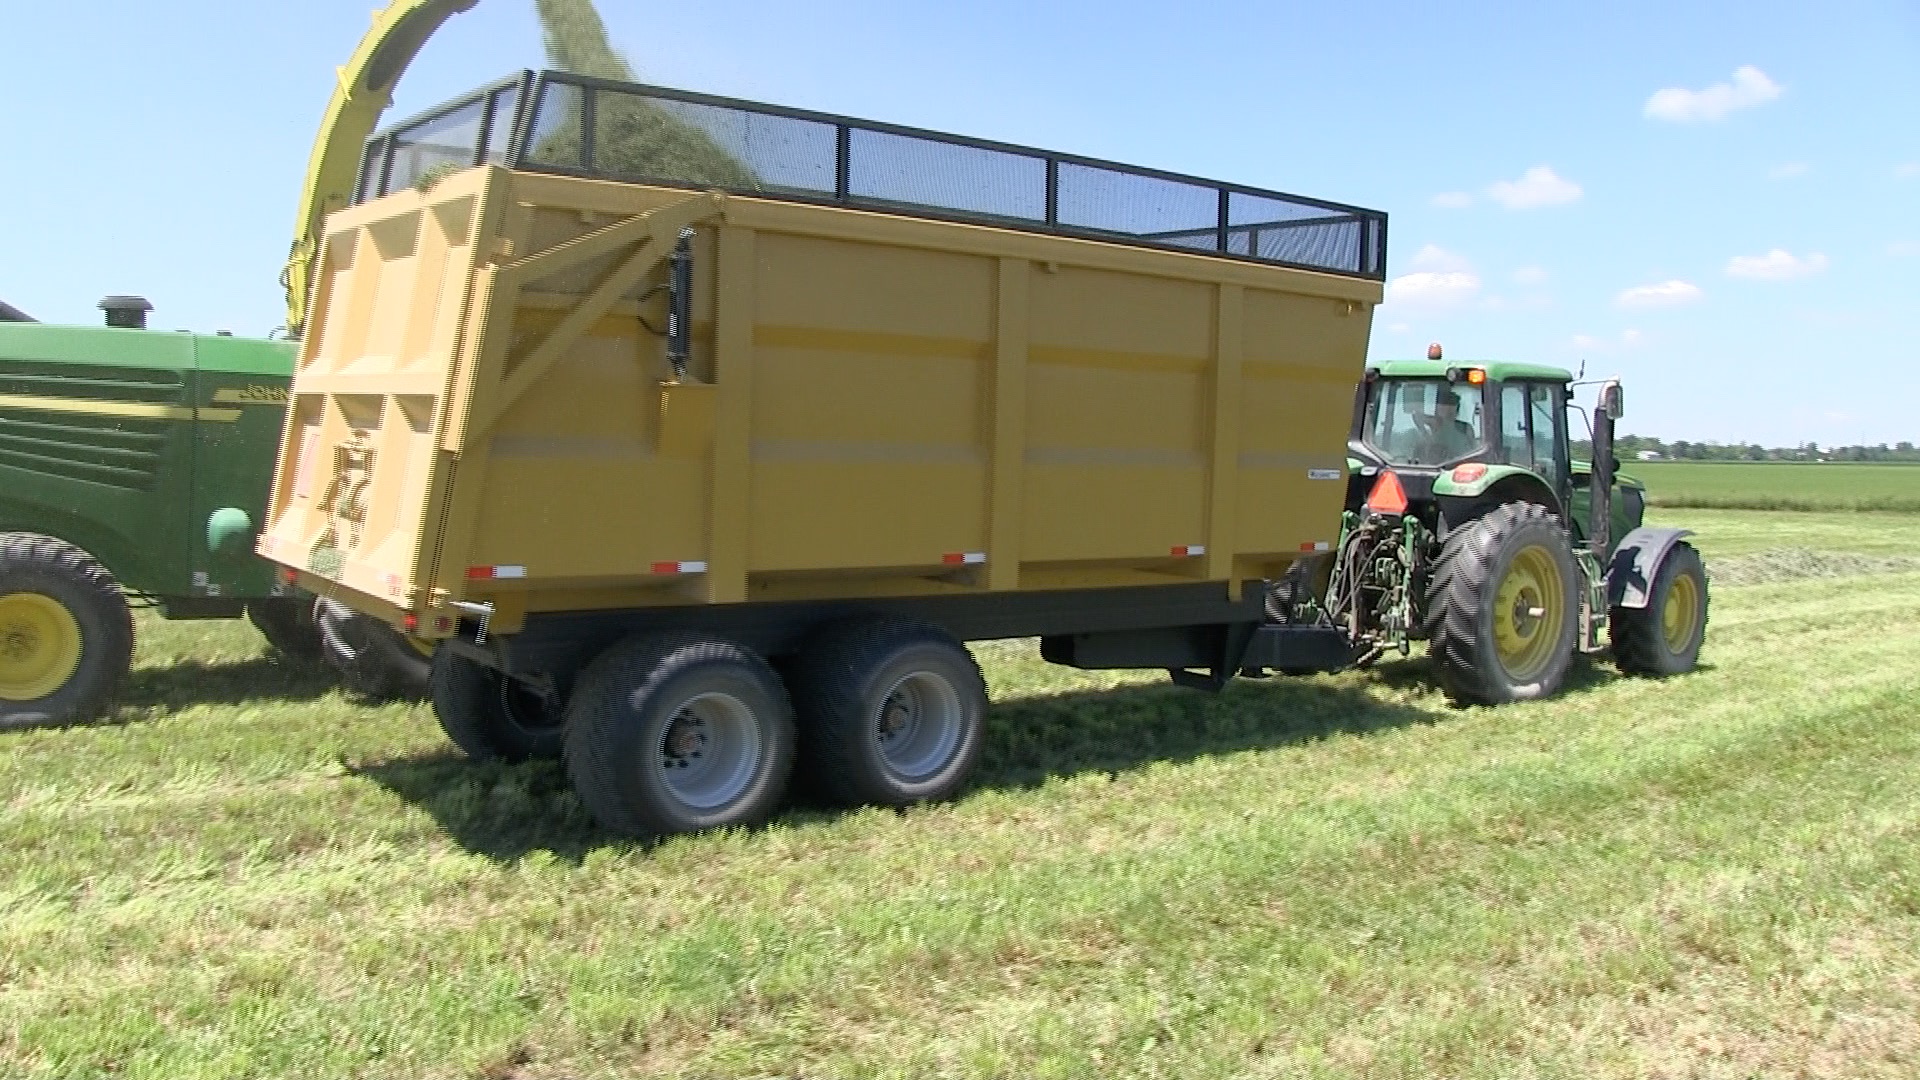 A side shot of the 20 ton dump trailer getting hay silage loaded into it